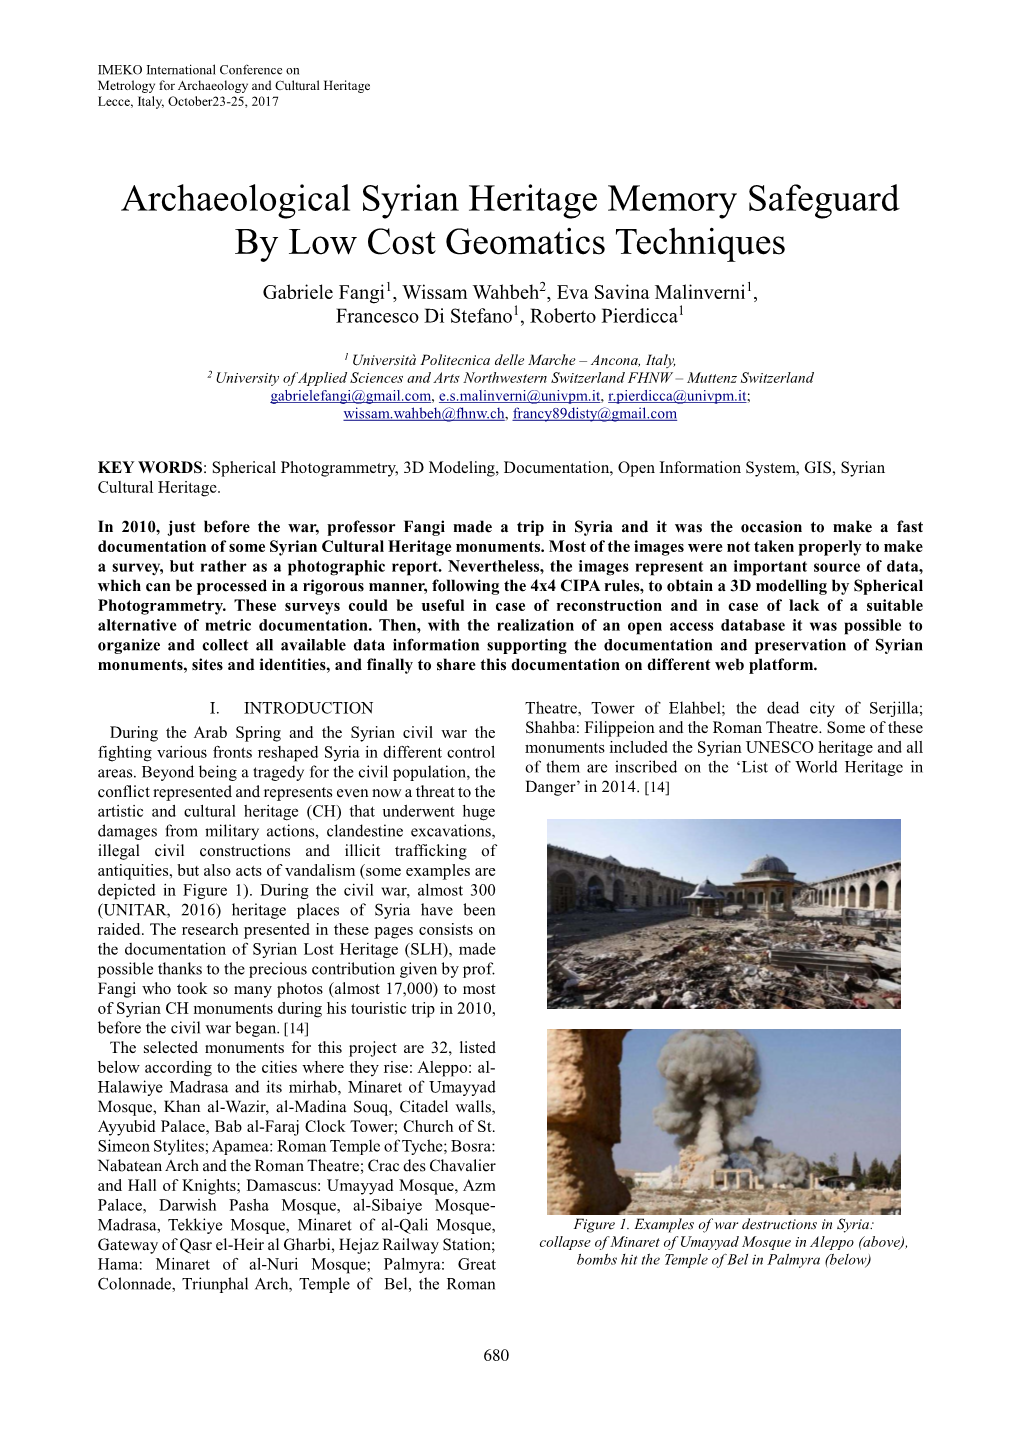 Archaeological Syrian Heritage Memory Safeguard by Low Cost Geomatics Techniques